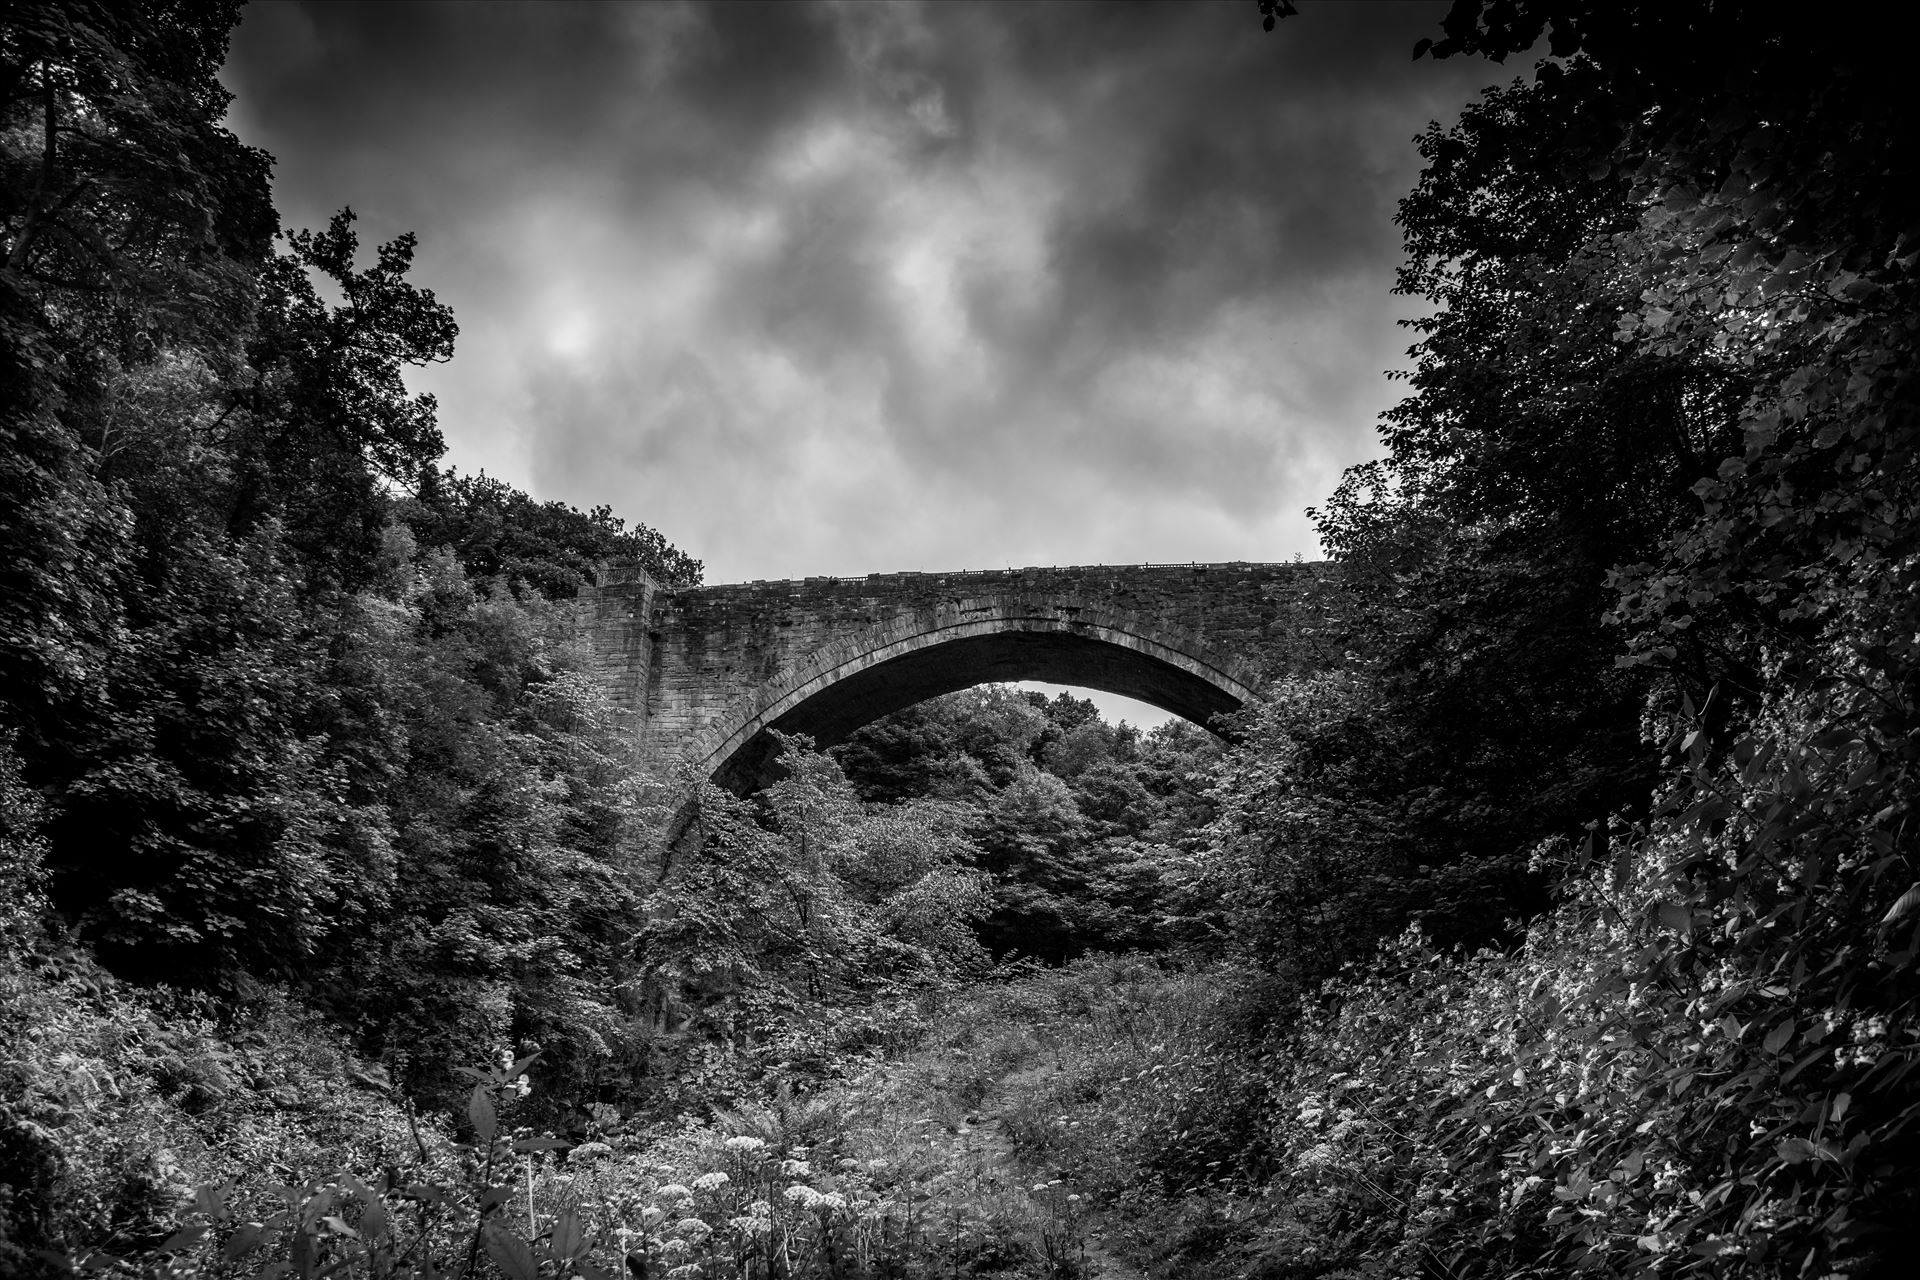 Causey Arch - The Causey Arch is a bridge near Stanley in County Durham. It is the oldest surviving single-arch railway bridge in the world. When the bridge was completed in 1726, it was the longest single-span bridge in the country. by philreay